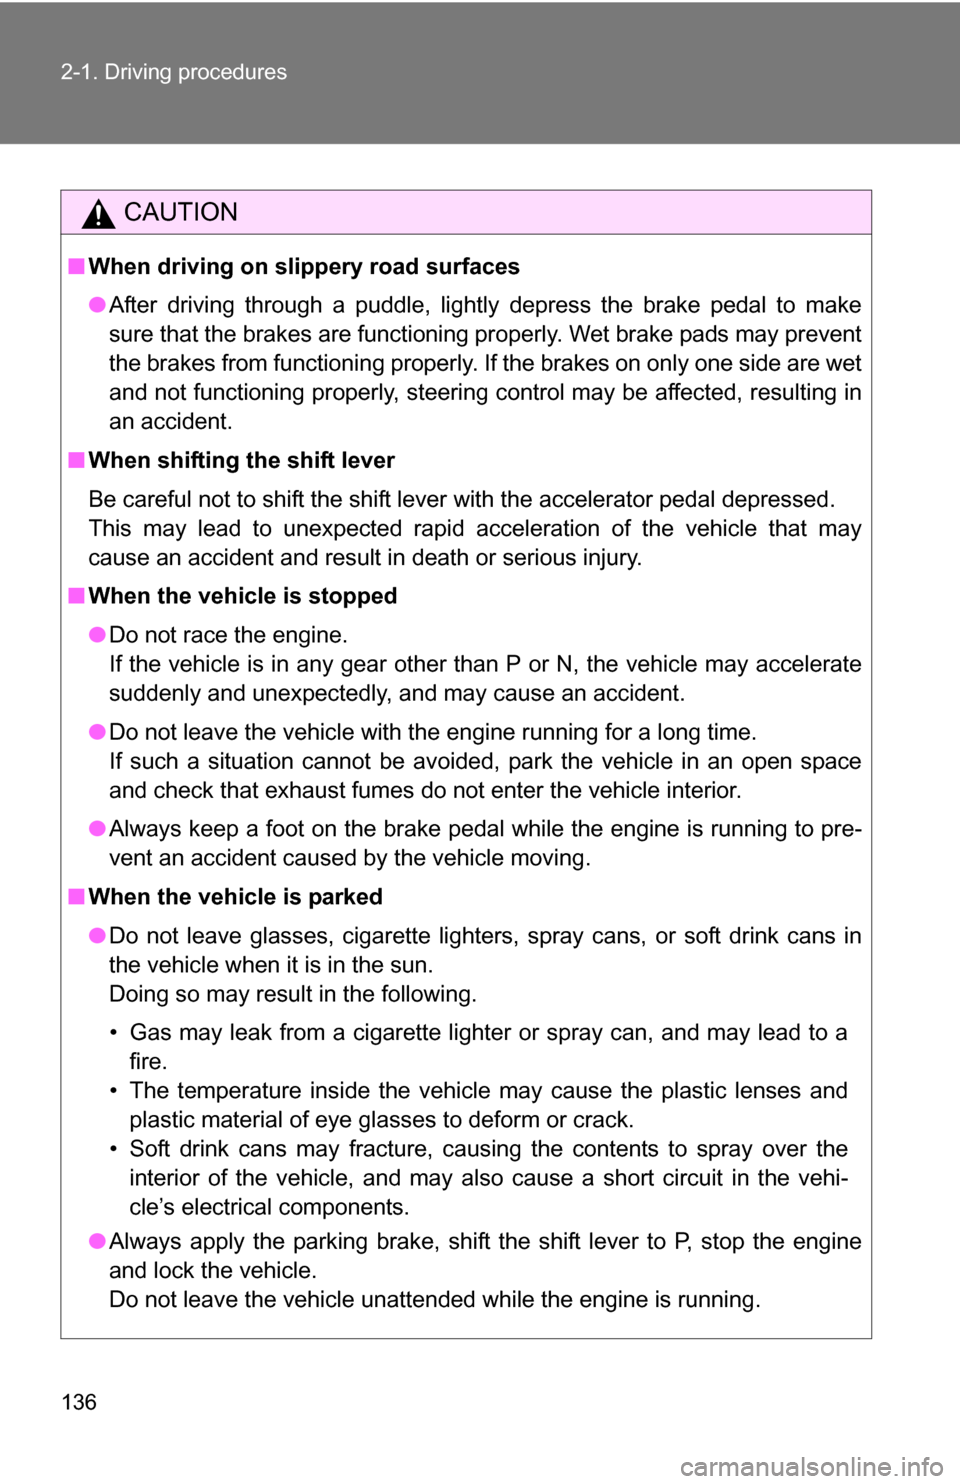 TOYOTA 4RUNNER 2009 N280 / 5.G Owners Manual 136 2-1. Driving procedures
CAUTION
■When driving on slippery road surfaces
●After driving through a puddle, lightly depress the brake pedal to make
sure that the brakes are functioning properly. 